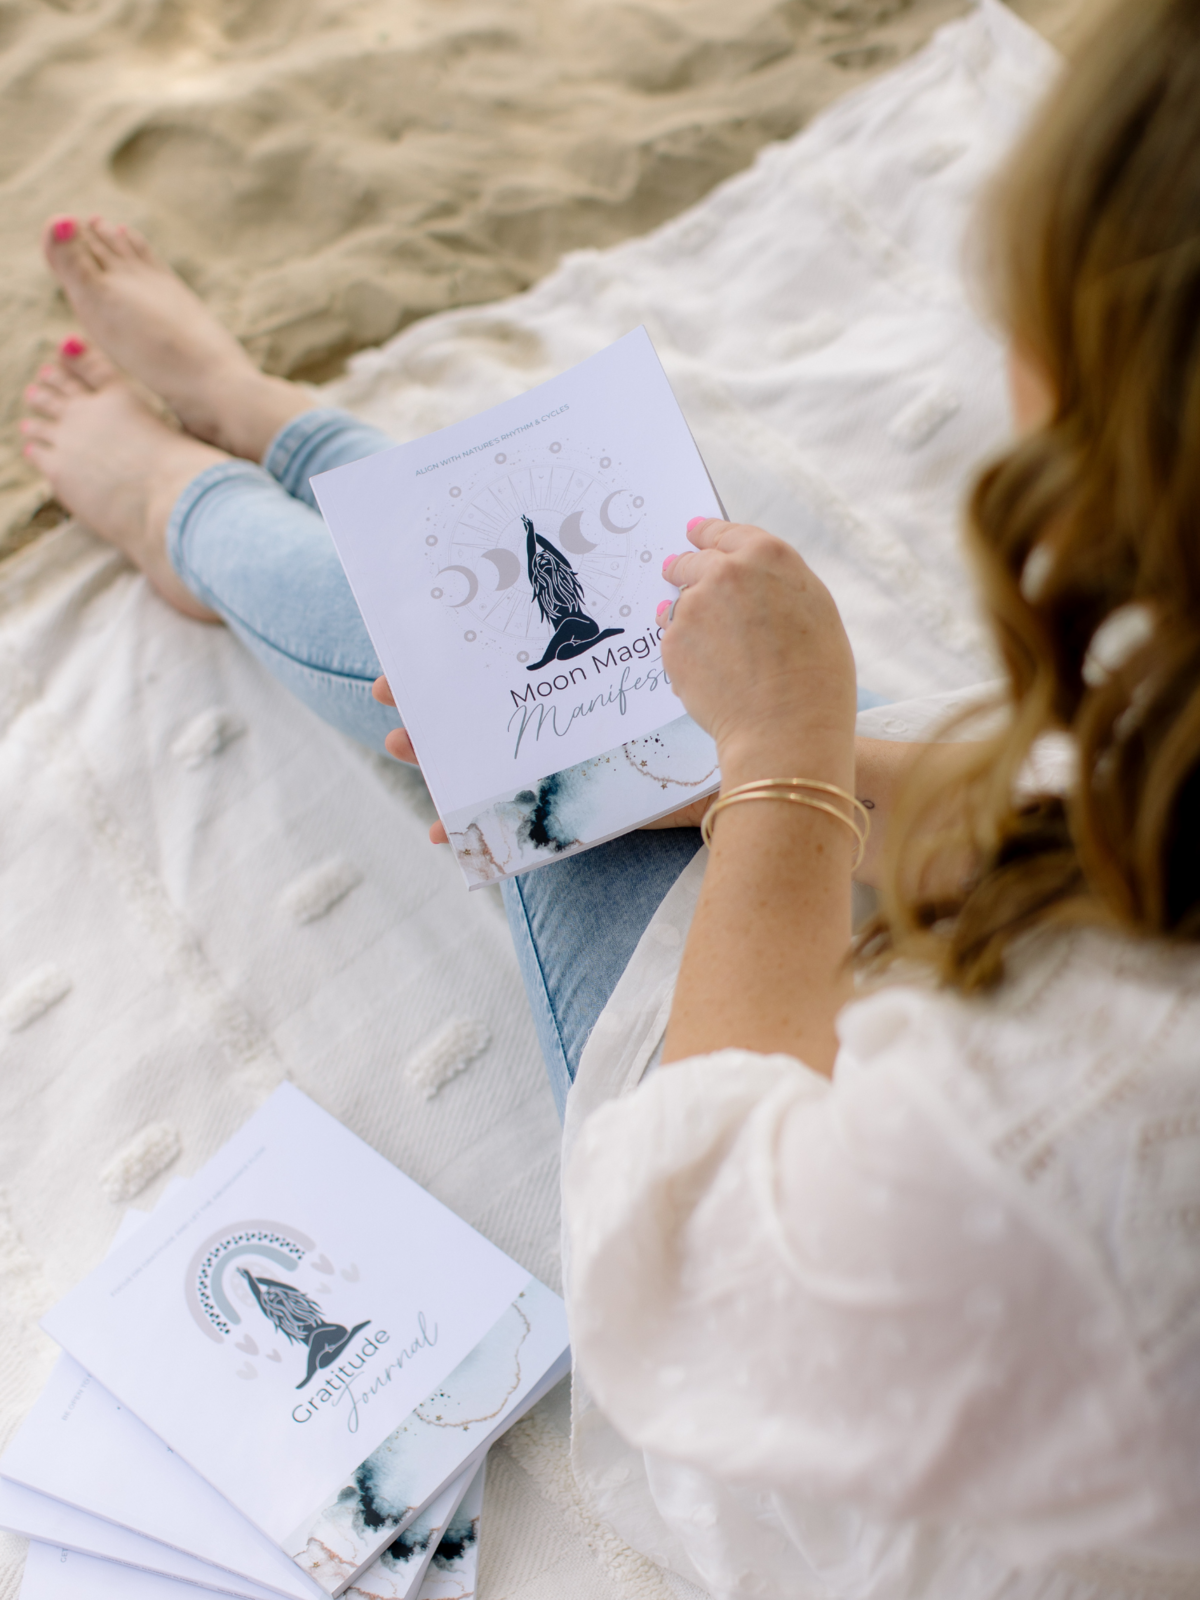 Mindfulness Journals to enhance your souls transition to new levels!